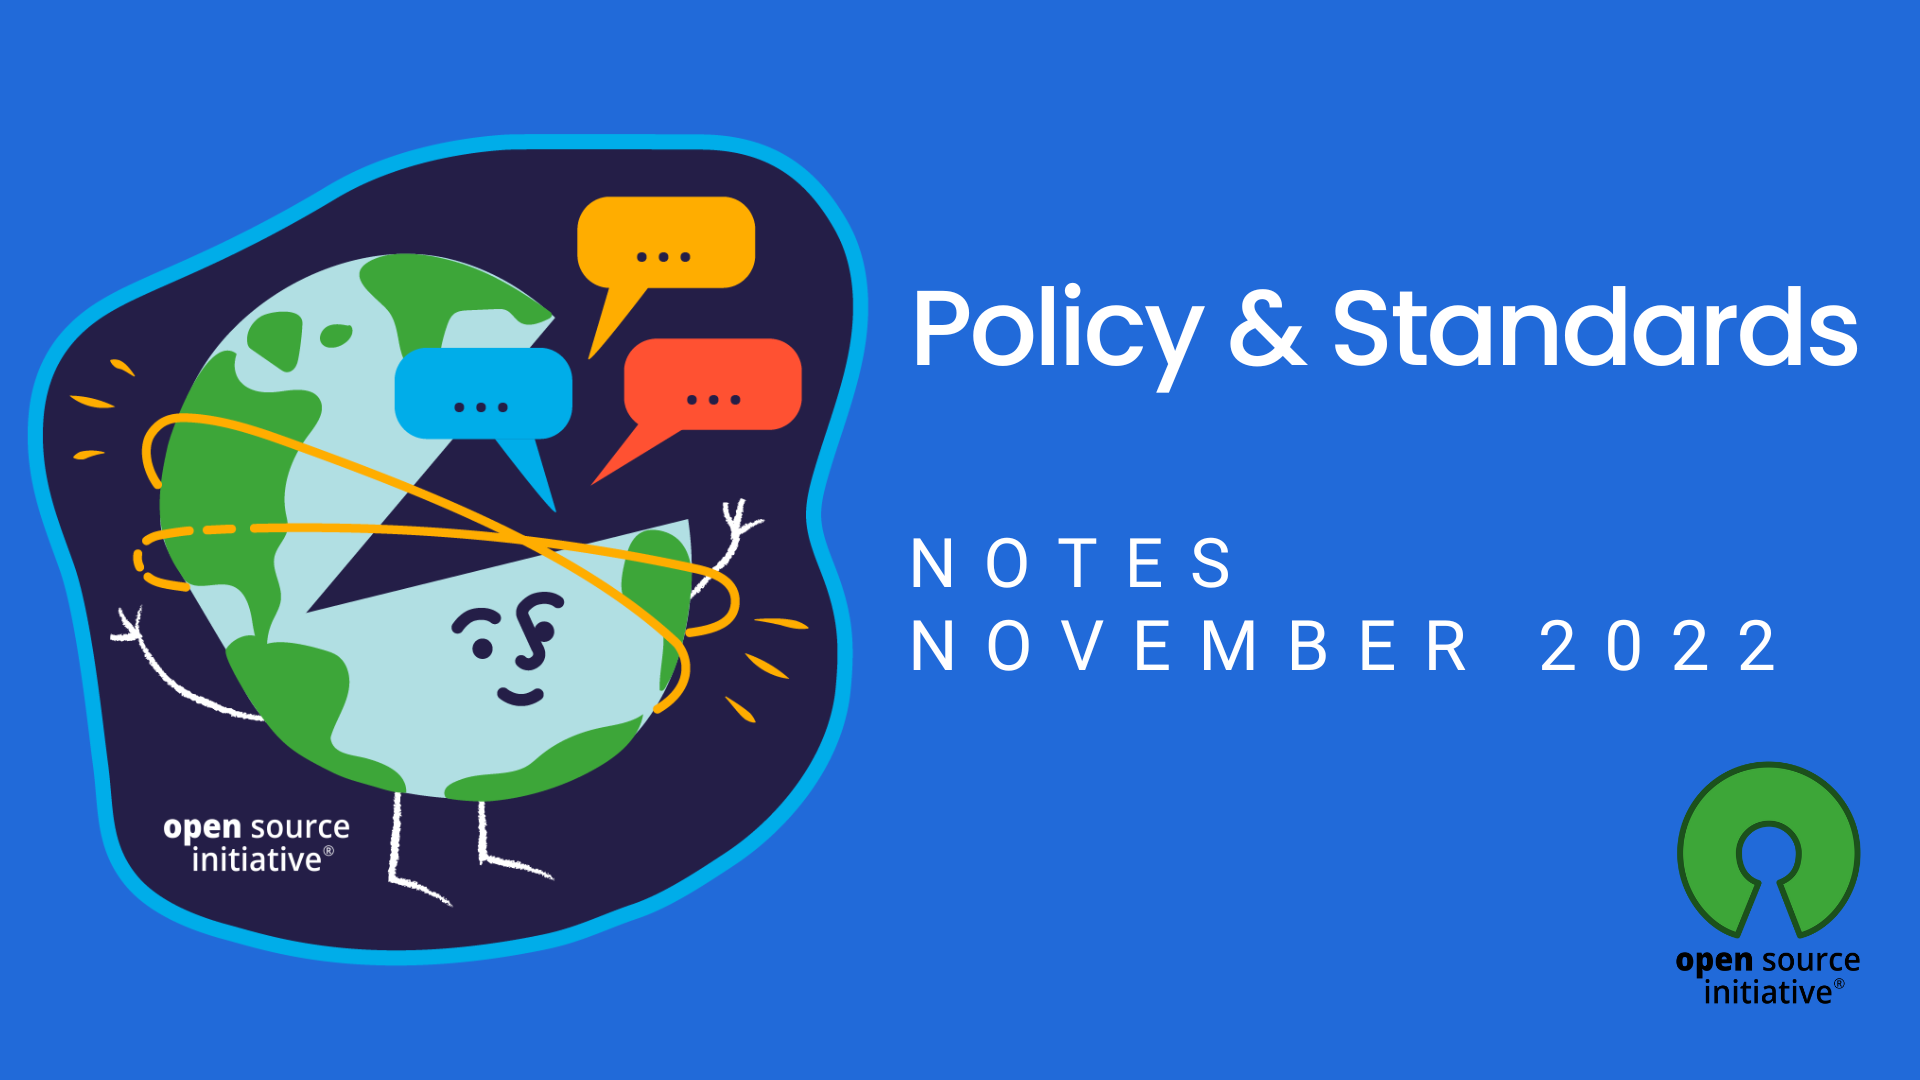 Notes from Policy and Standards program – November 2022